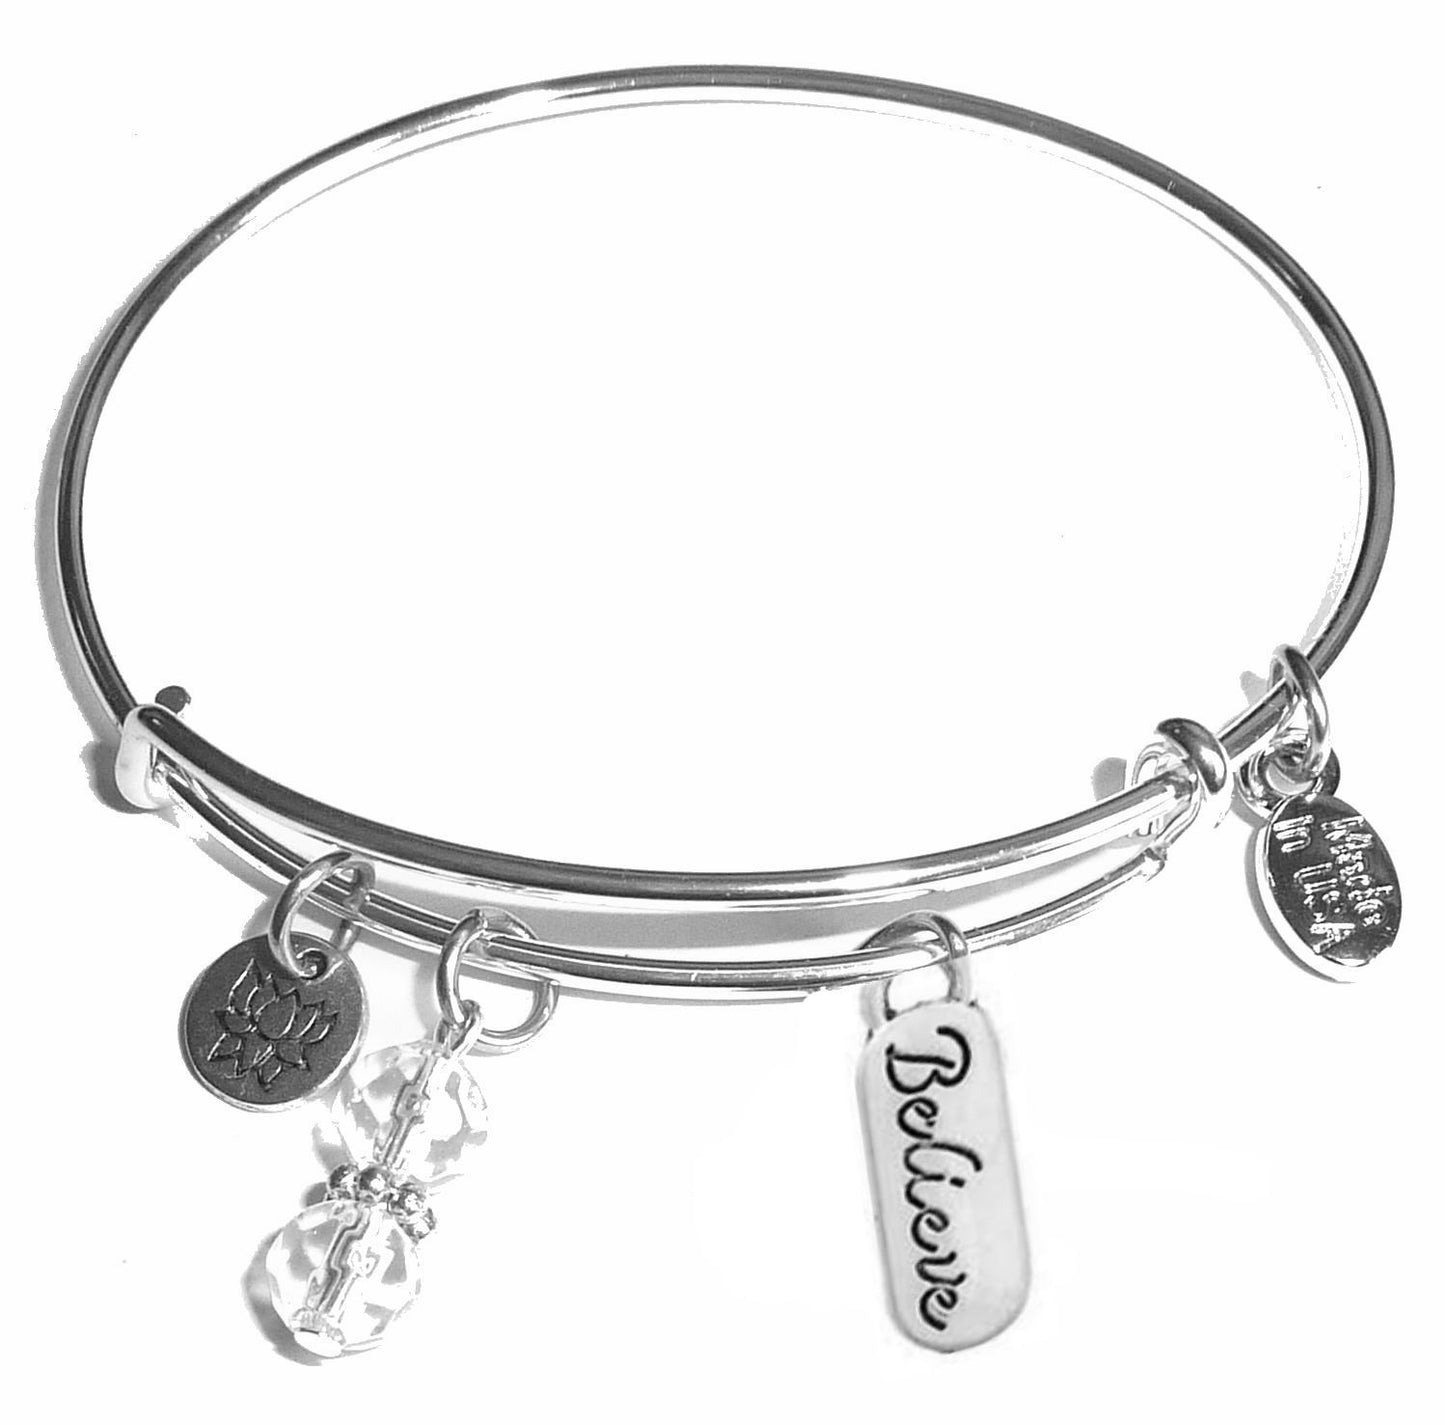 Believe - Message Bangle Bracelet -Expandable Wire Bracelet– Comes in a gift box